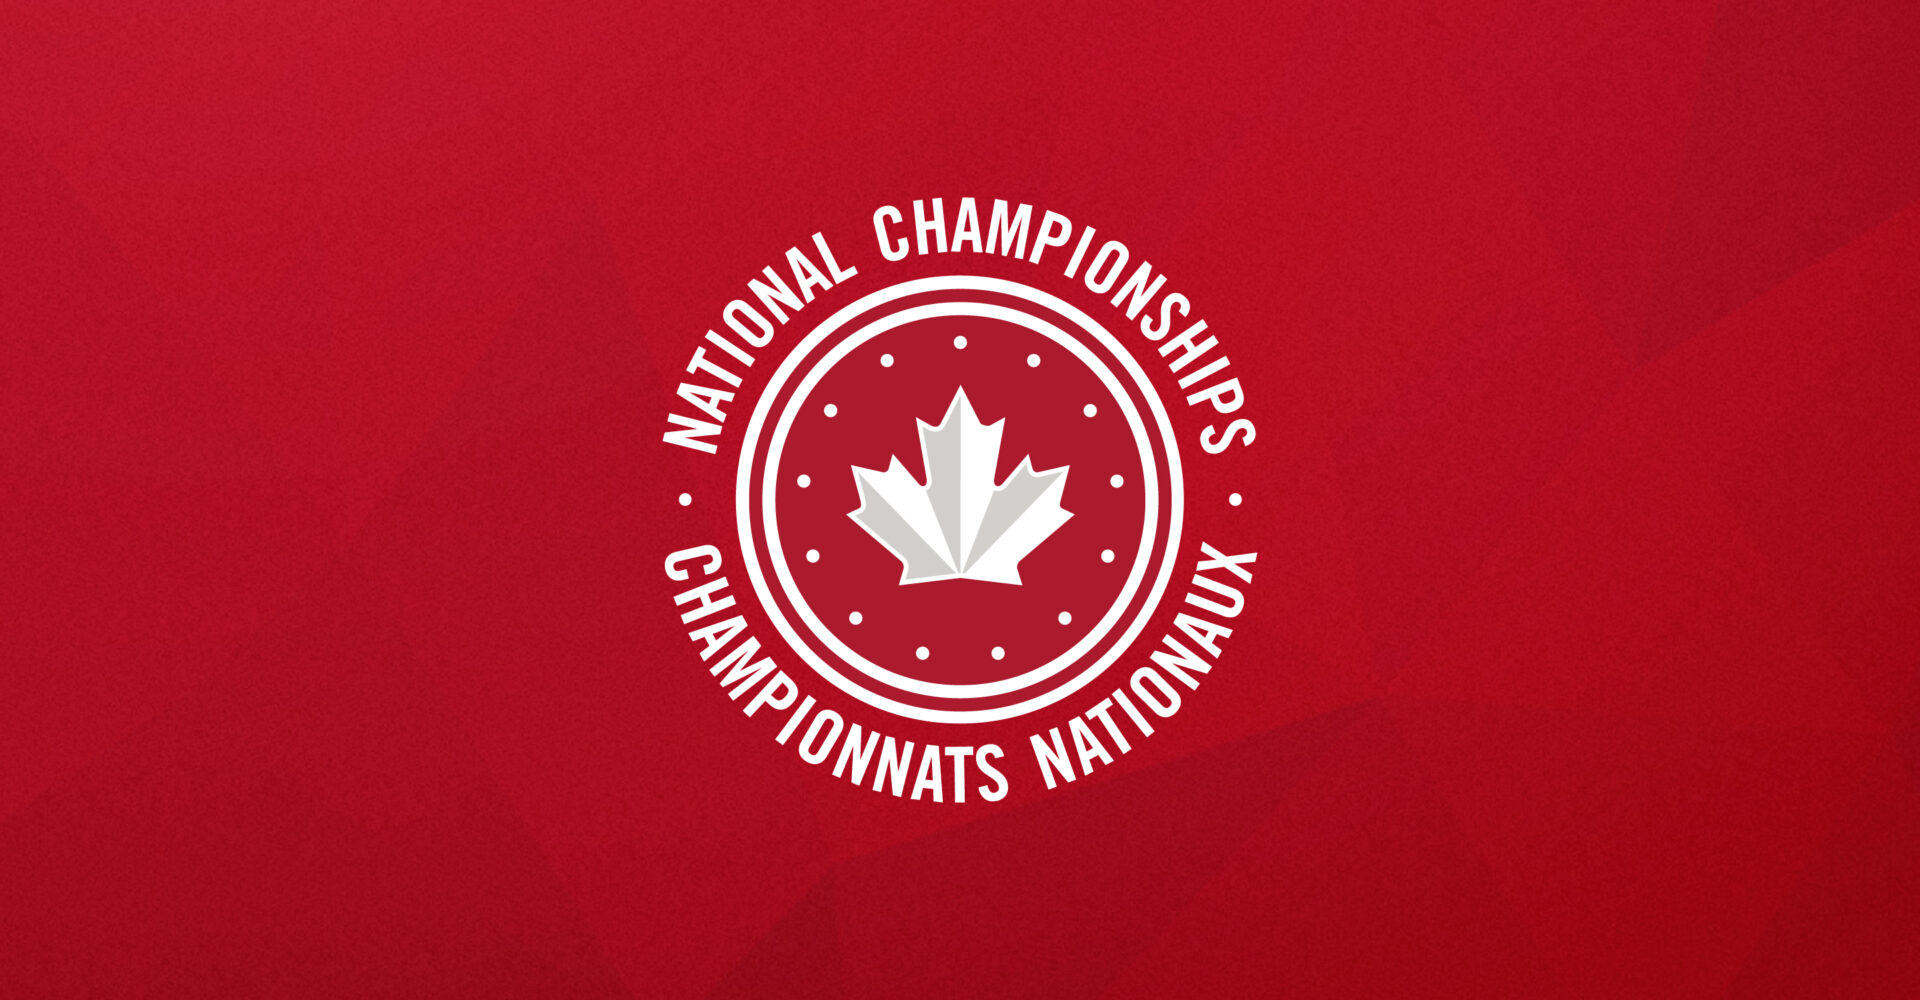 Wheelchair Rugby Canada announces cancellation of the 2021 National Championships